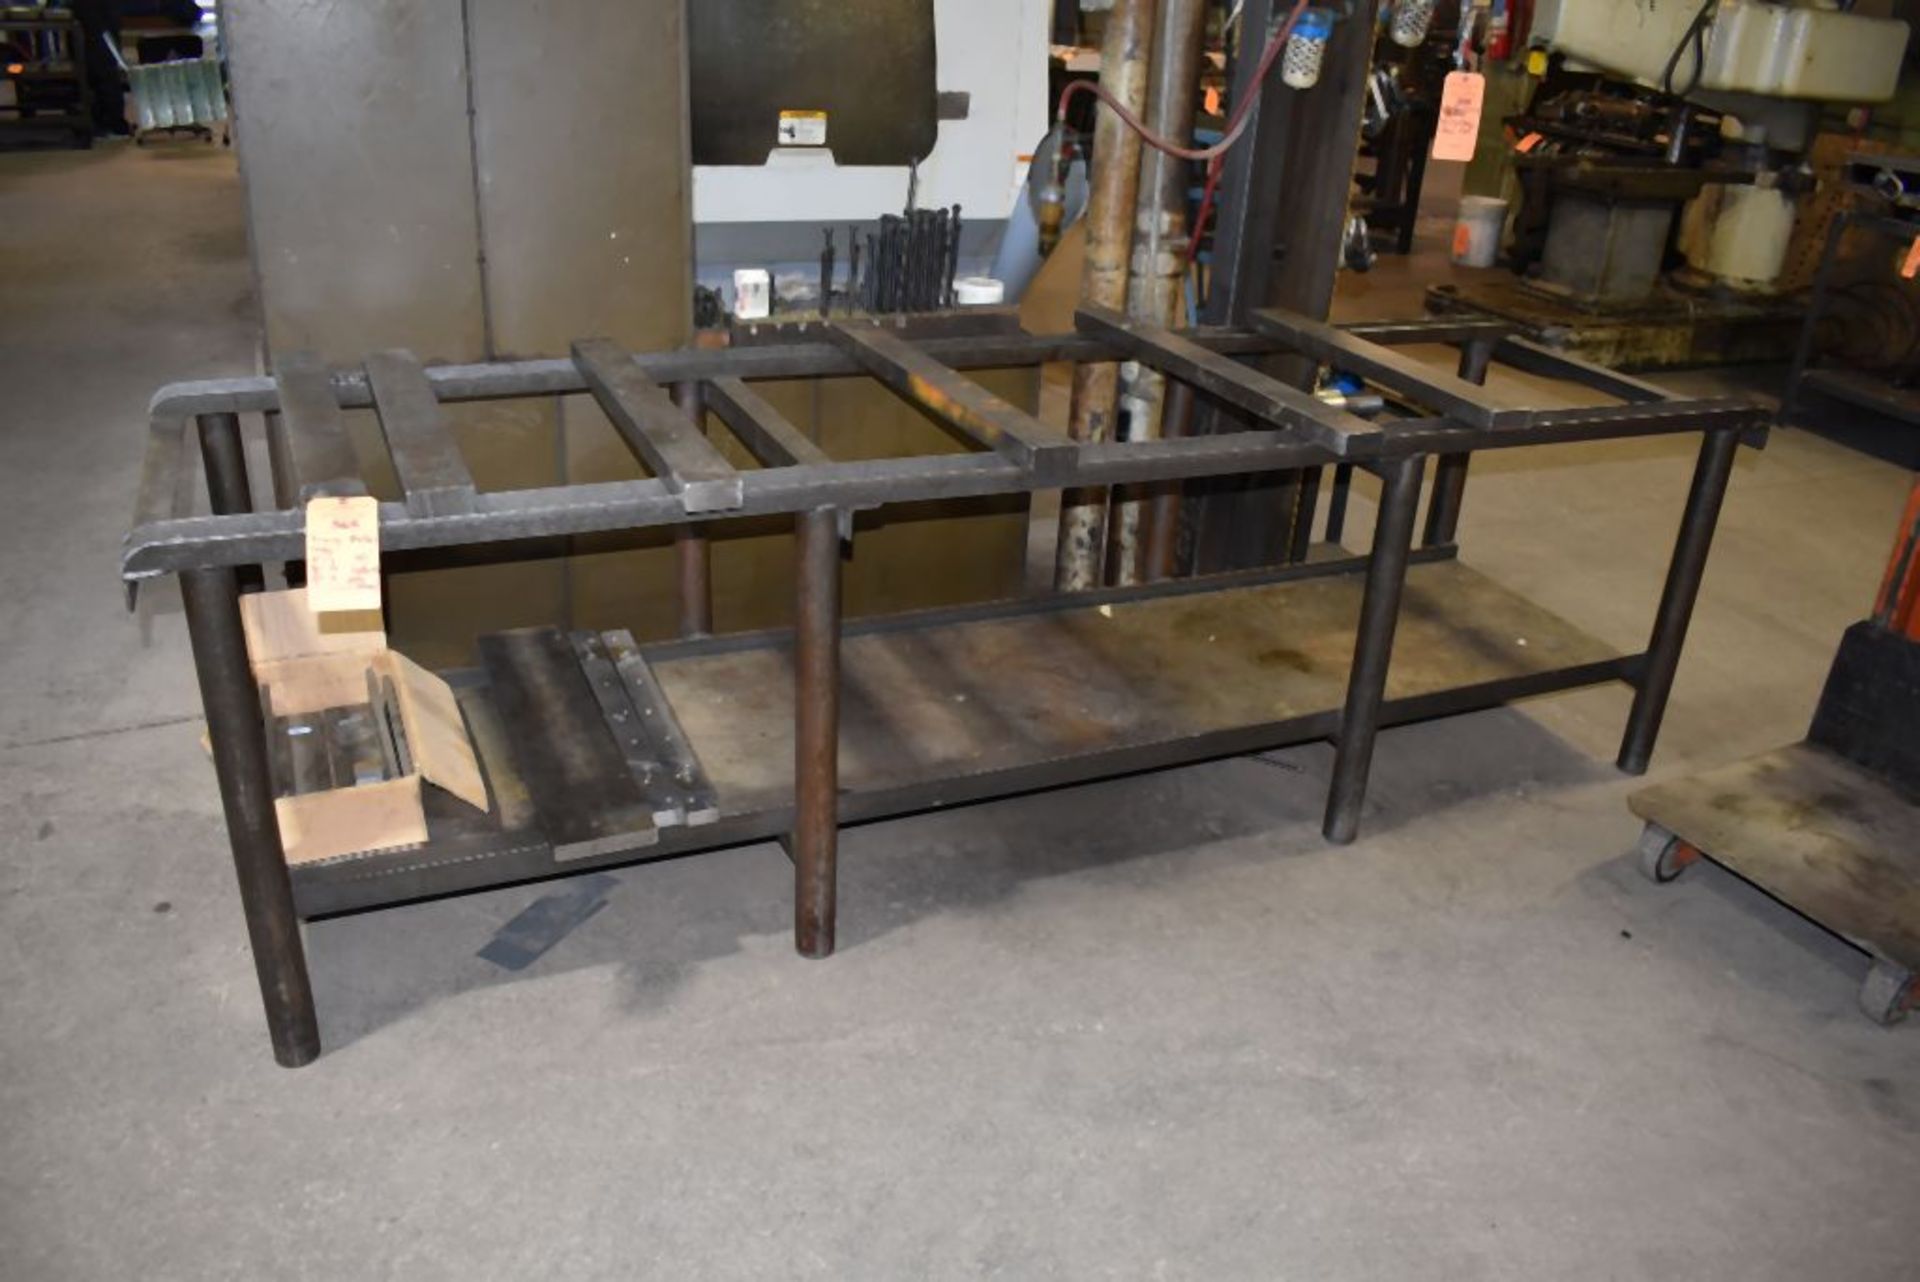 HEAVY METAL TABLE FRAME WITH CONTENTS; STEEL PIECES, 9'L x 30"D x 32"H